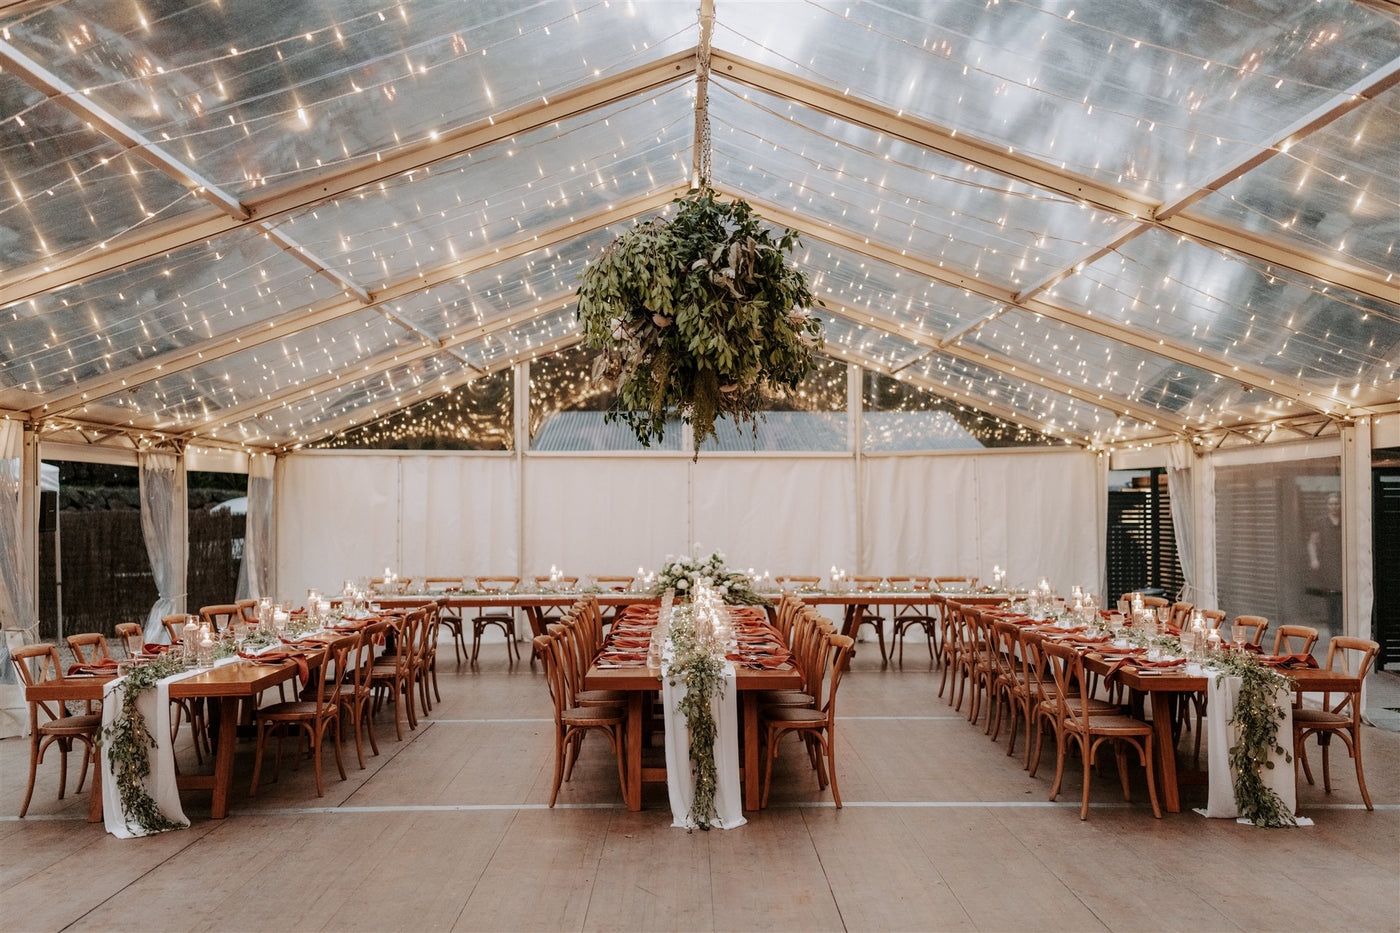 Wedding venue with tables and chairs set up in a clear marquee venue with magical lights.